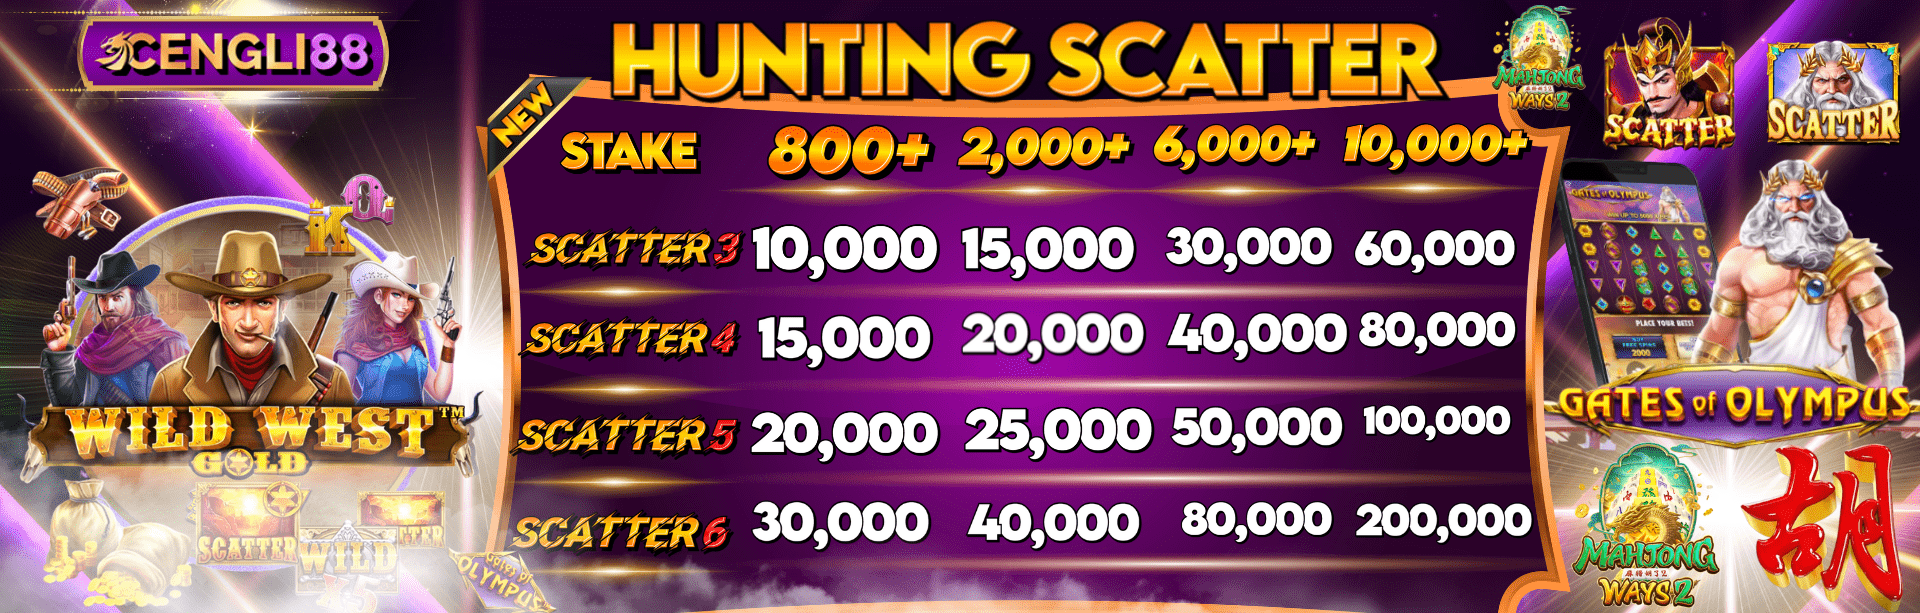 HUNTING SCATTER  !!!